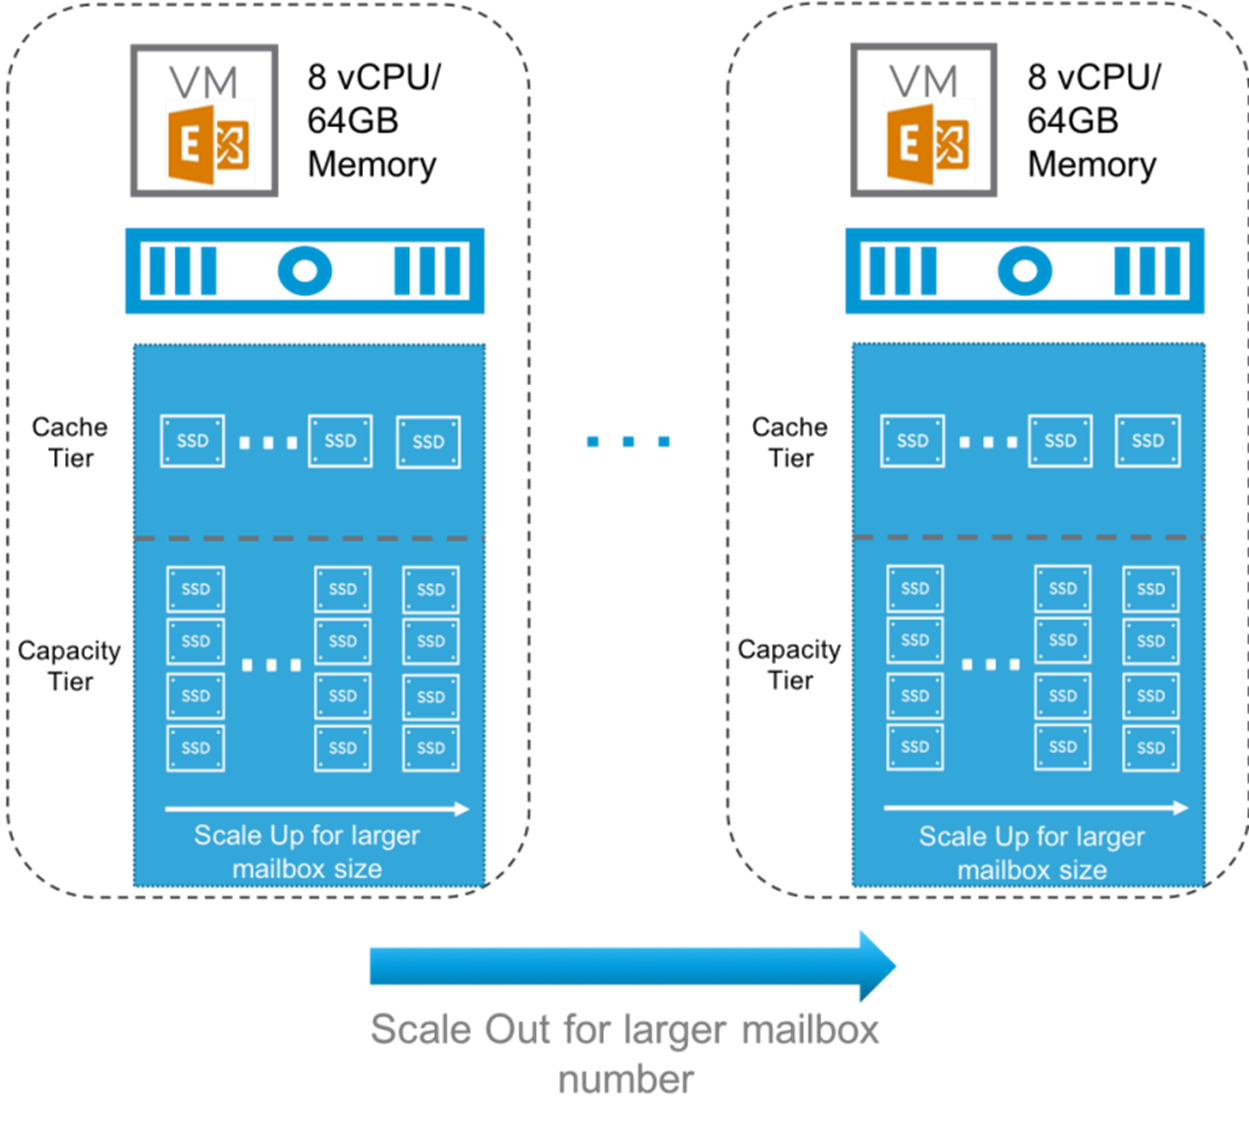 Building Block Methodology for vSAN Scale-up and Scale-out Sizing for Exchange 2016